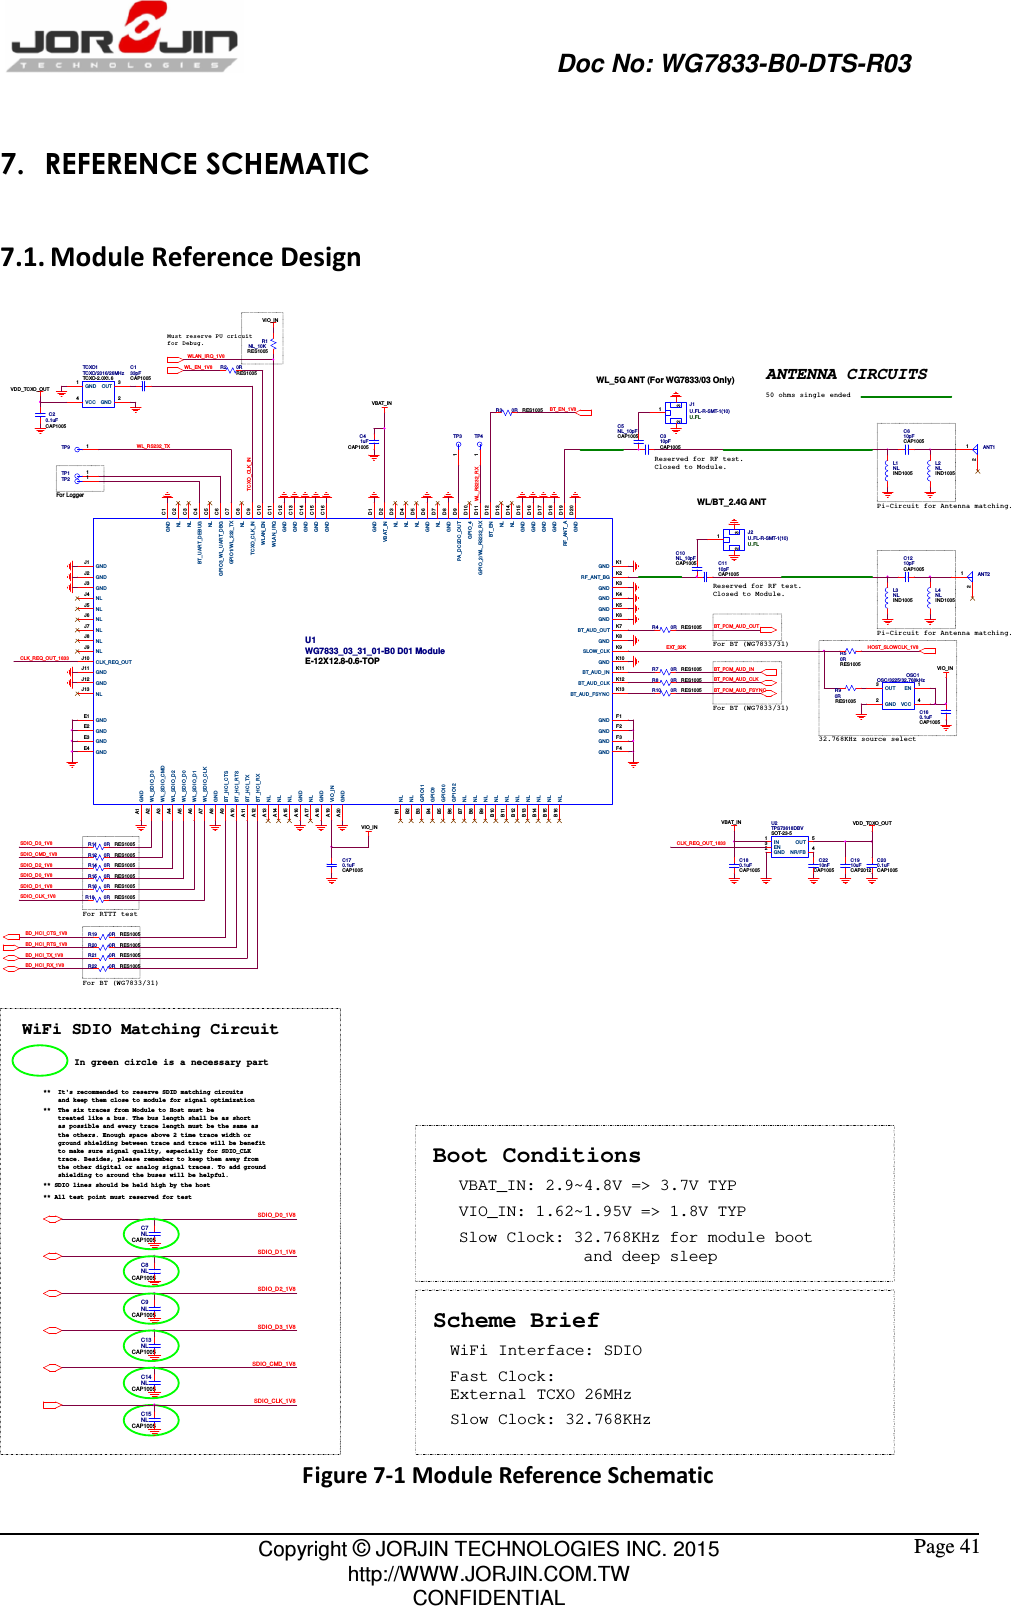                                                   Doc No: WG7833-B0-DTS-R03                                                                                                 Copyright © JORJIN TECHNOLOGIES INC. 2015 http://WWW.JORJIN.COM.TW CONFIDENTIAL  Page 41 7. REFERENCE SCHEMATIC 7.1. Module Reference Design BT_EN_1V8R3 0R RES1005VIO_INWLAN_I RQ_1V8R1NL_10KRES1005TC XO_CLK_INC41uFCAP1005For RTTT testVBAT_INEXT_32KTCXO1TCXO/2016/26MHzTCXO-2.0X1.6GND1VCC4OUT 3GND 2C133pFCAP1005U1WG7833_03_31_01-B0 D01 ModuleE-12X12.8-0.6-TOPGND C13GND C14GND C15GND C16NLB16NLB15NLB14NLB13NLB12NLB11NLB10NLB9NLB8NLB7GP1O12B6GPIO10B5GPIO9B4GPIO11B3NLJ9NLJ8NLB2NLB1CLK_REQ_OUTJ10NLJ13NLJ7NLJ6NLJ5NLJ4GNDJ11GNDJ12GNDJ3VBAT_IN D2GNDJ1GNDA1WL_SDI O_D3A2WL_SDI O_CMDA3WL_SDI O_D2A4WL_SDI O_D0A5WL_SDI O_D1A6WL_SDI O_CLKA7GNDA8BT_HCI _RXA12BT_HCI _RT SA10BT_HCI _CT SA9NLA15GNDA16NLA17GNDA18BT_AUD_FSY NC K13BT_AUD_CLK K12BT_AUD_IN K11GND K10SLOW_CLK K9GND K8GND K3GND K6BT_AUD_OUT K7GND K4GND K5RF _ANT_BG K2GND K1GND D20GND D15NL D5GND D6PA_DC2 DC_OU T D9GND D8NL D14GPIO_4 D10BT_EN D12GNDJ2RF_ANT _A D19GND D16GND D17GND D18GND C12WLAN _IRQ C11WLAN_EN C10TCXO_CLK_IN C9NL C8GPIO3_WL_U ART_D BG C6NL D7NL C5BT_UART_DEBUG C4NL C3NL C2GND C1GNDE1GNDE2GNDE3GNDE4 GND F4GND F 3NLA13NLA14NL D13GPIO_2/ WL_RS232_RX D11NL D4NL D3GPIO1/WL_232_TX C7GND D1GND F 2GND F 1VIO_INA19GNDA20BT_HCI _TXA11WL/BT_2.4G ANTL3NLIND 1005C1110pFCAP1005C10NL_10pFCAP1005C1210pFCAP1005Reserved for RF test.  Closed to Module.L4NLIND 1005Pi-Circuit for Antenna matching.ANT212CLK_REQ_OUT_1833TP9 1WL_RS232_TXVDD _TCXO_OUTU2SOT-23-5TPS73618DBVIN1GND2EN3NR/ FB 4OUT 5C180.1uFCAP1005C1910uFCAP2012C200.1uFCAP1005C2210nFCAP1005VBAT_INWL_5G ANT (For WG7833/03 Only)L1NLIND 1005C5NL_10pFCAP1005 C310pFCAP1005Reserved for RF test.  Closed to Module.C610pFCAP1005L2NLIND 1005VDD_TCXO_OUTANT112Pi-Circuit for Antenna matching.CLK_REQ_OUT_1833R22 0R RES1005R19 0R RES1005For BT (WG7833/31)BD_HC I_TX_1V8BD_HC I_RX_1V8BD_HC I_CTS_1V8R21 0R RES1005R20 0R RES1005R7 0R RES1005 BT_PCM_AUD_I NBT_PCM_AUD _CLKR8 0R RES1005R10 0R RES1005 BT_PCM_AUD_FSYN CMust reserve PU cricuit for Debug.C20.1uFCAP1005BT_PCM_AUD _OUTR4 0R RES1005C160.1uFCAP1005OSC1OSC/3 225/32.768kHzEN 1VCC 4OUT3GND2R90RRES100532.768KHz source selectVIO_INTP3150 ohms single endedANTENNA CIRCUITSTP41WL_RS232_R XJ2U. FL-R-SMT-1(10)U. FL12 3HOST_SLOWCLK_1V8R50RRES1005C170.1uFCAP1005VIO_INWL_EN_1V8 R2 0RRES1005For BT (WG7833/31)R11 0R RES1005R15 0R RES1005R12 0R RES1005R18 0R RES1005R14 0R RES1005SDIO_D 3_1V8R16 0R RES1005SDIO_C LK_1V8SDIO_D 0_1V8SDIO_D 2_1V8SDIO_C MD_1V8SDIO_D 1_1V8For BT (WG7833/31)TP1 1TP2 1For LoggerJ1U.F L-R-SMT-1(10)U.F L12 3BD_HC I_RTS_1V8 C9NLCAP1005C13NLCAP1005C7NLCAP1005C8NLCAP1005C15NLCAP1005C14NLCAP1005**  The six traces from Module to Host must be     treated like a bus. The bus length shall be as short     as possible and every trace length must be the same as     the others. Enough space above 2 time trace width or     ground shielding between trace and trace will be benefit     to make sure signal quality, especially for SDIO_CLK     trace. Besides, please remember to keep them away from     the other digital or analog signal traces. To add ground         shielding to around the buses will be helpful.**  It&apos;s recommended to reserve SDID matching circuits    and keep them close to module for signal optimization WiFi SDIO Matching CircuitSDIO_D1_1V8SDIO_CLK_1V8SDIO_D3_1V8SDIO_D2_1V8** All test point must reserved for testSDIO_CMD_1V8SDIO_D0_1V8In green circle is a necessary part ** SDIO lines should be held high by the host      Boot ConditionsScheme BriefWiFi Interface: SDIOSlow Clock: 32.768KHz for module boot              and deep sleepVIO_IN: 1.62~1.95V =&gt; 1.8V TYPVBAT_IN: 2.9~4.8V =&gt; 3.7V TYPFast Clock: External TCXO 26MHz Slow Clock: 32.768KHz Figure 7-1 Module Reference Schematic 